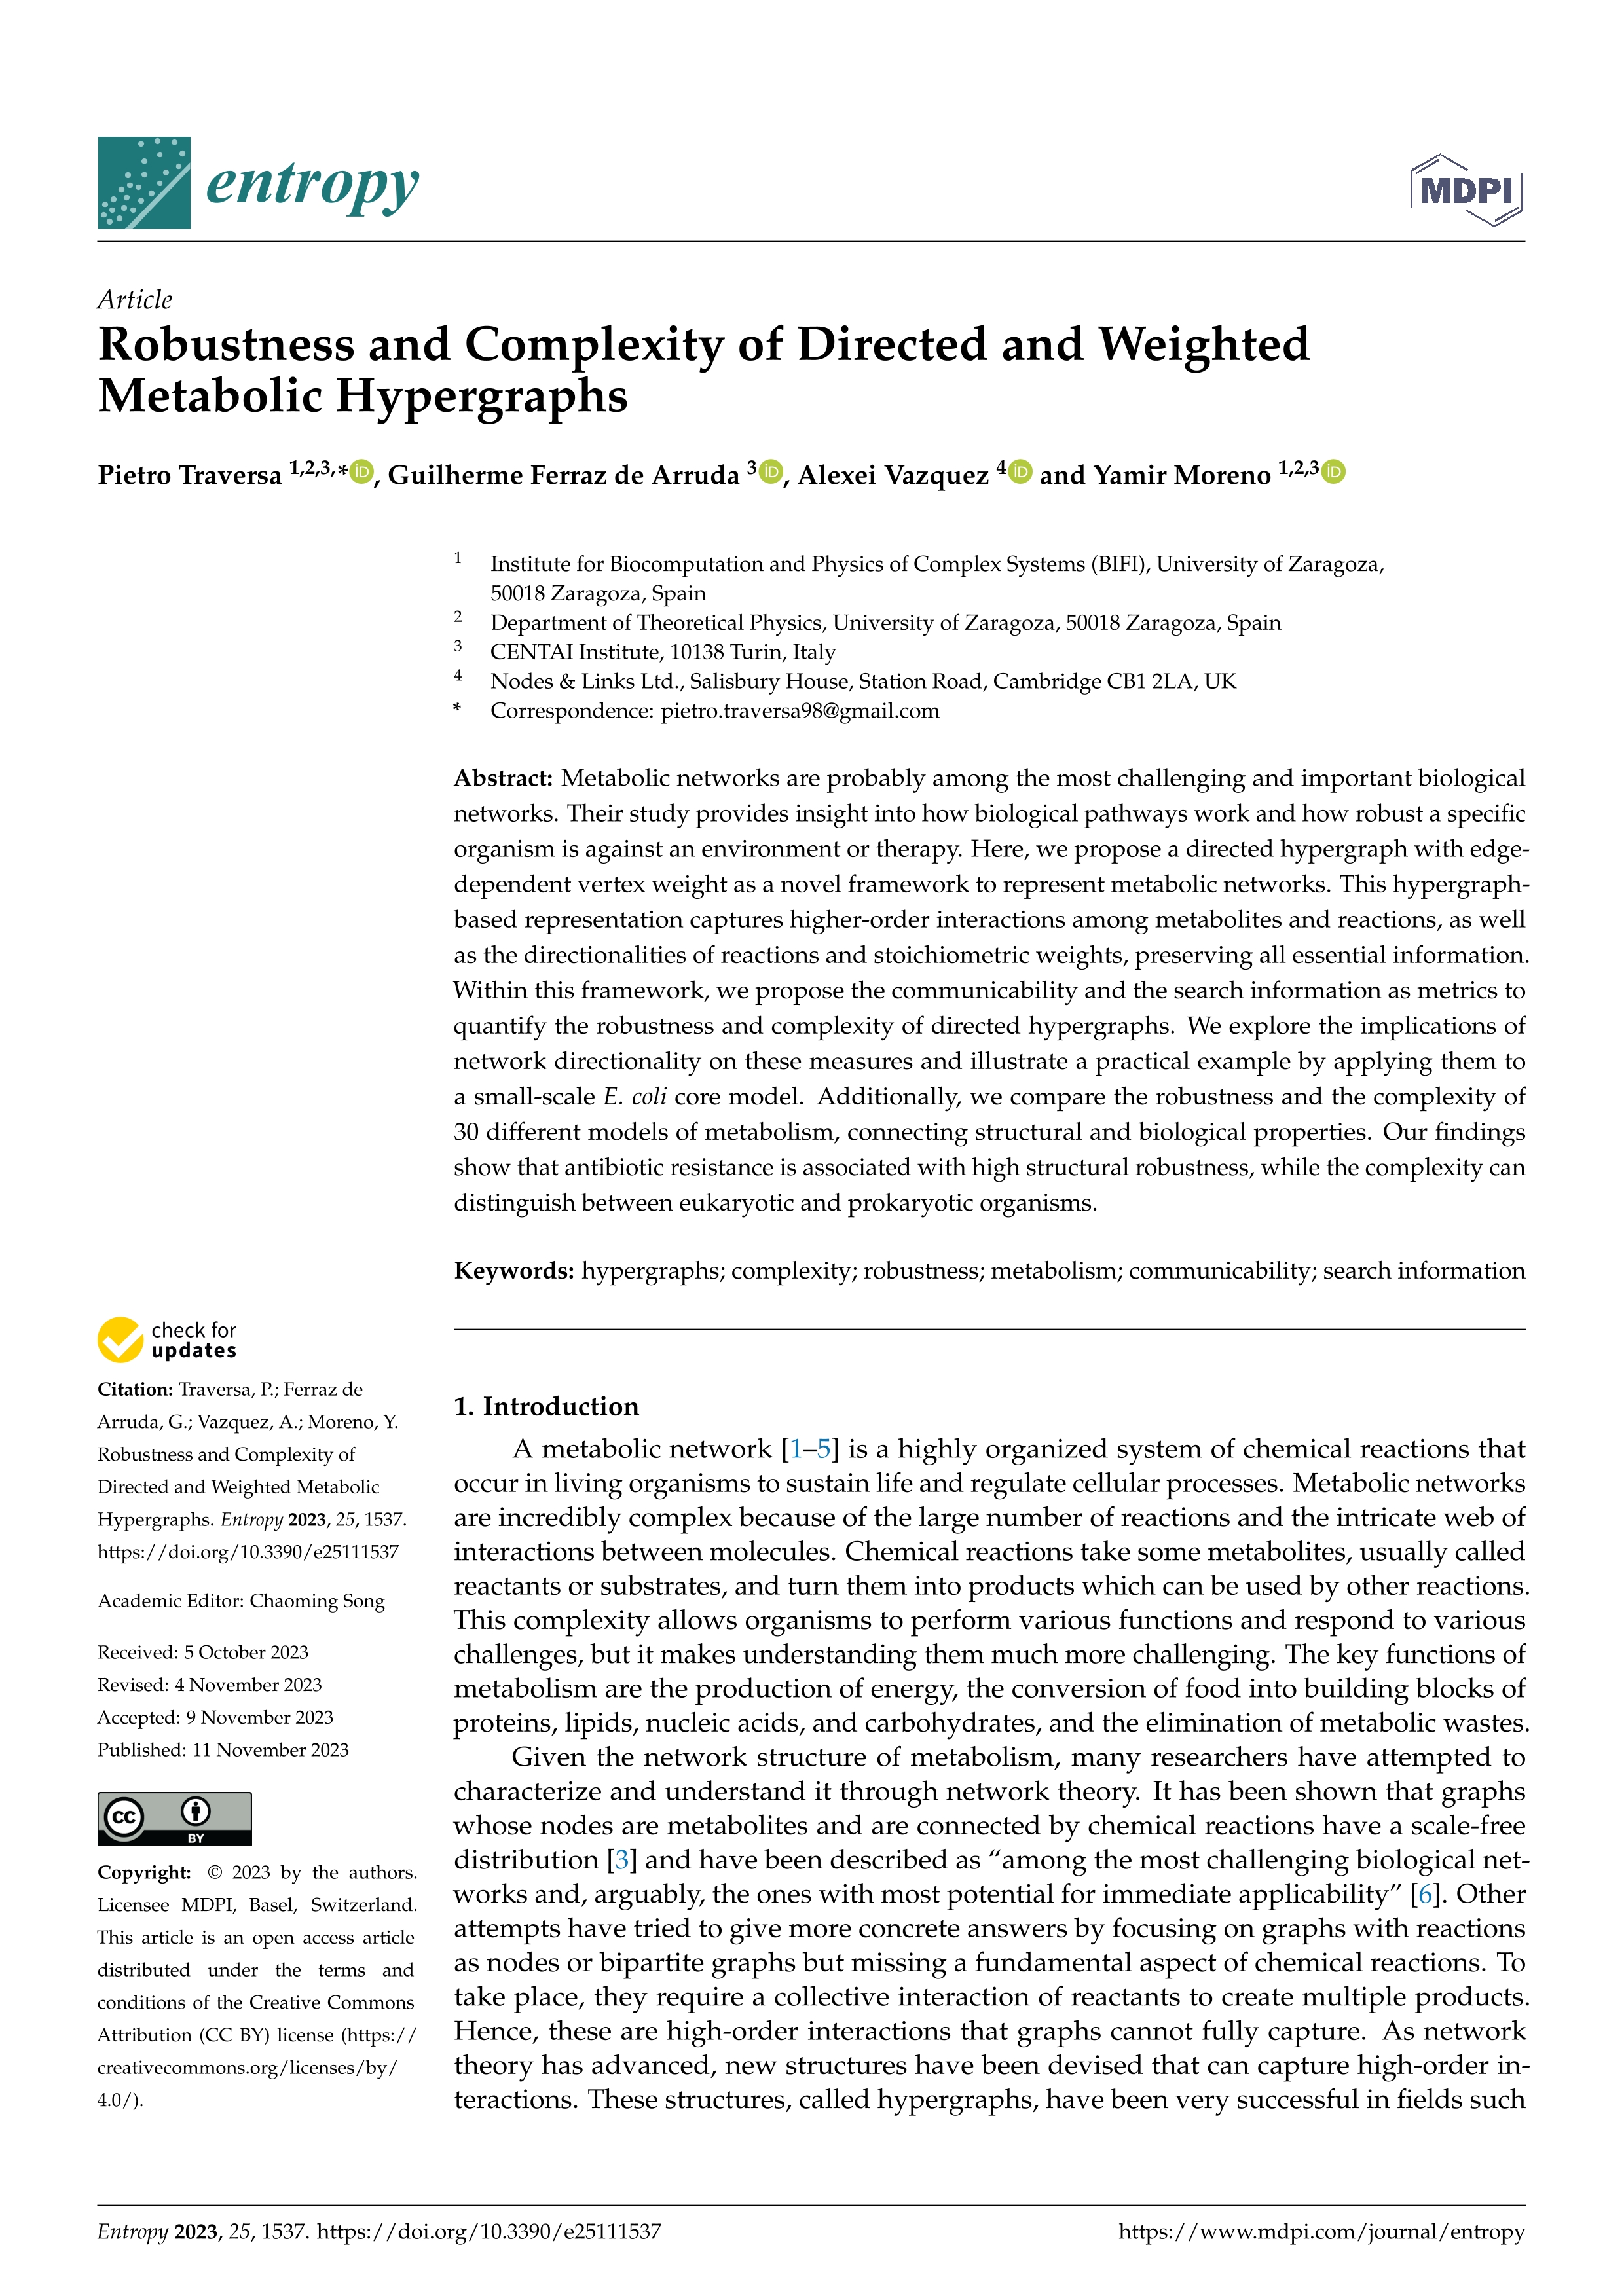 Robustness and complexity of directed and weighted metabolic hypergraphs